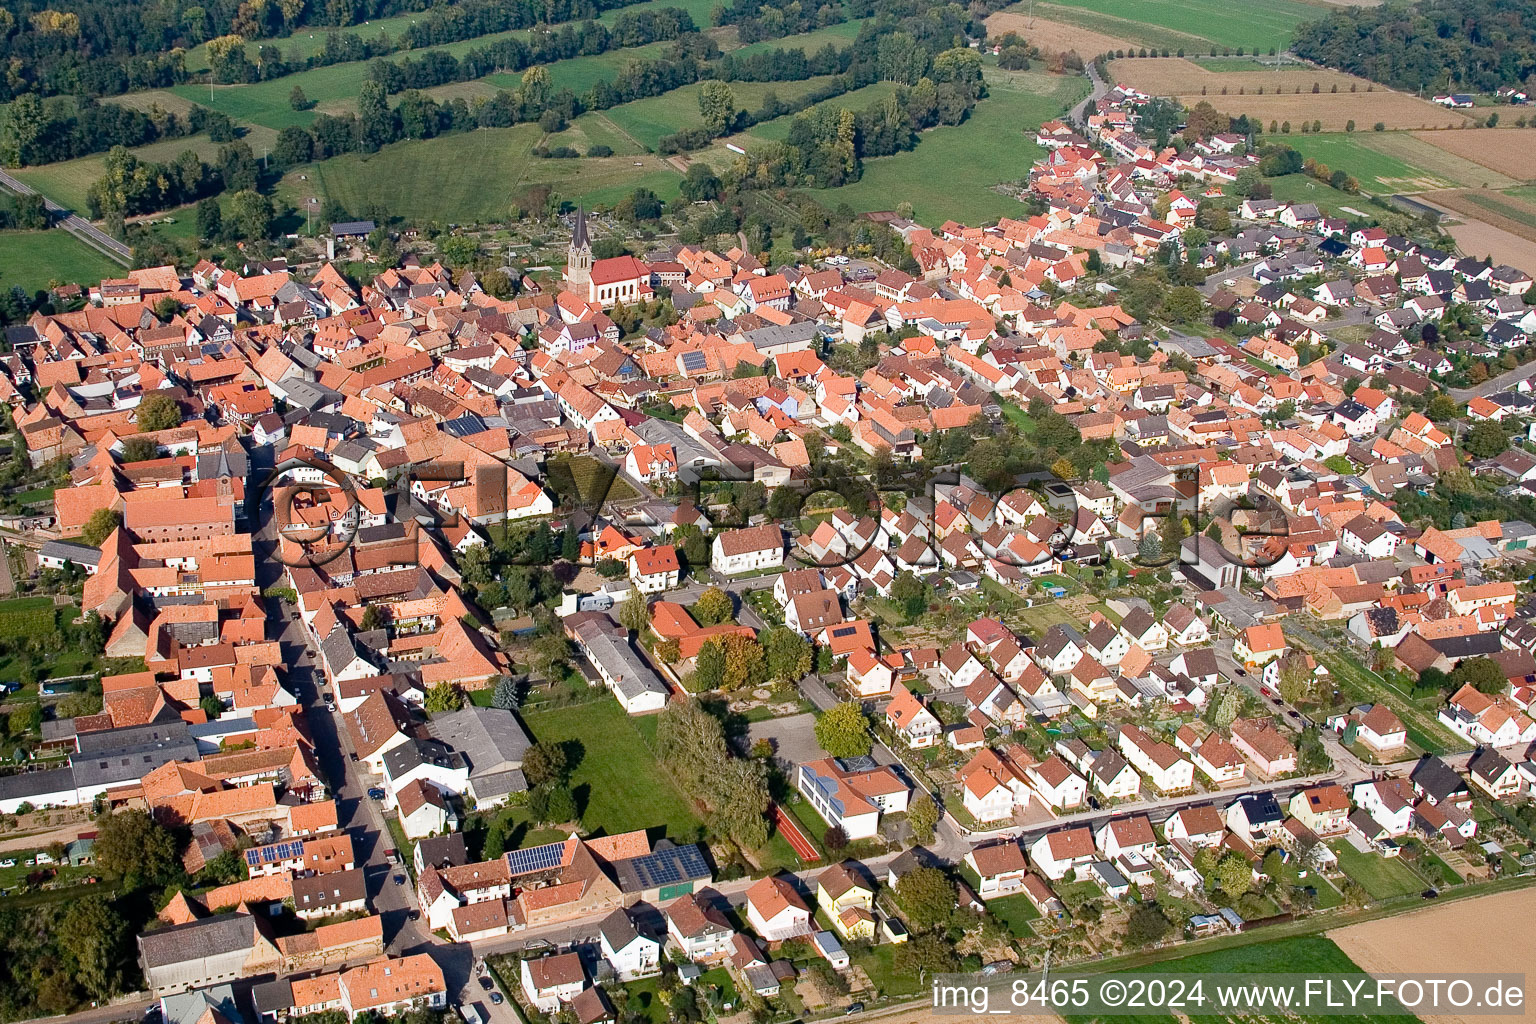 Aerial photograpy of Village - view on the edge of agricultural fields and farmland in Steinweiler in the state Rhineland-Palatinate